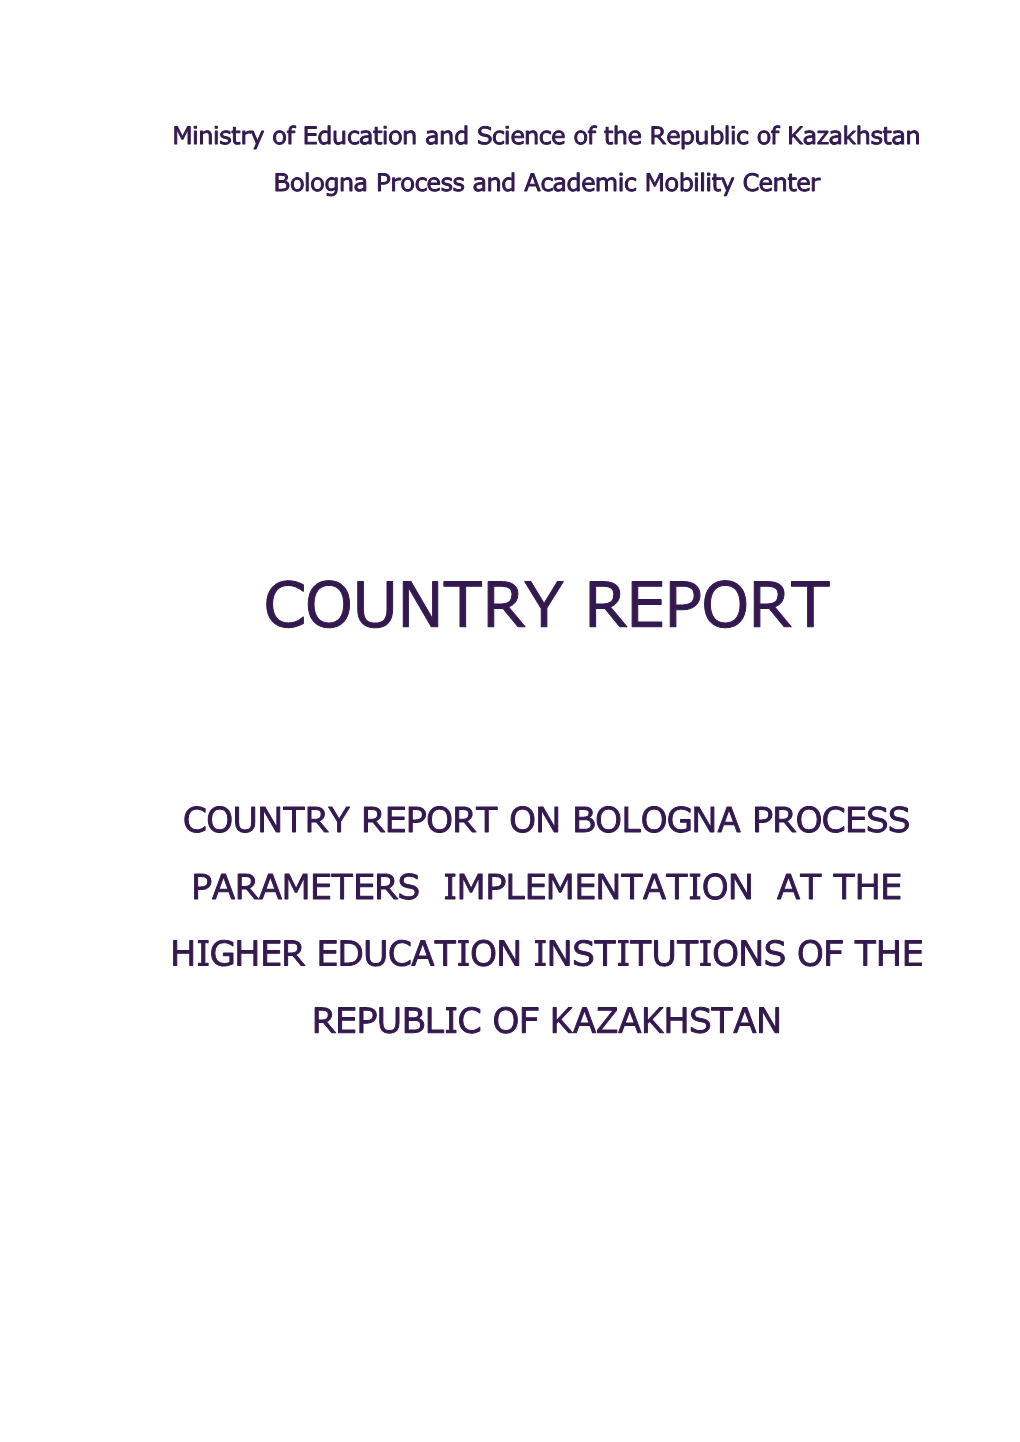 Country Report on Bologna Process Parameters Implementation at the Higher Education Institutions of the Republic of Kazakhstan